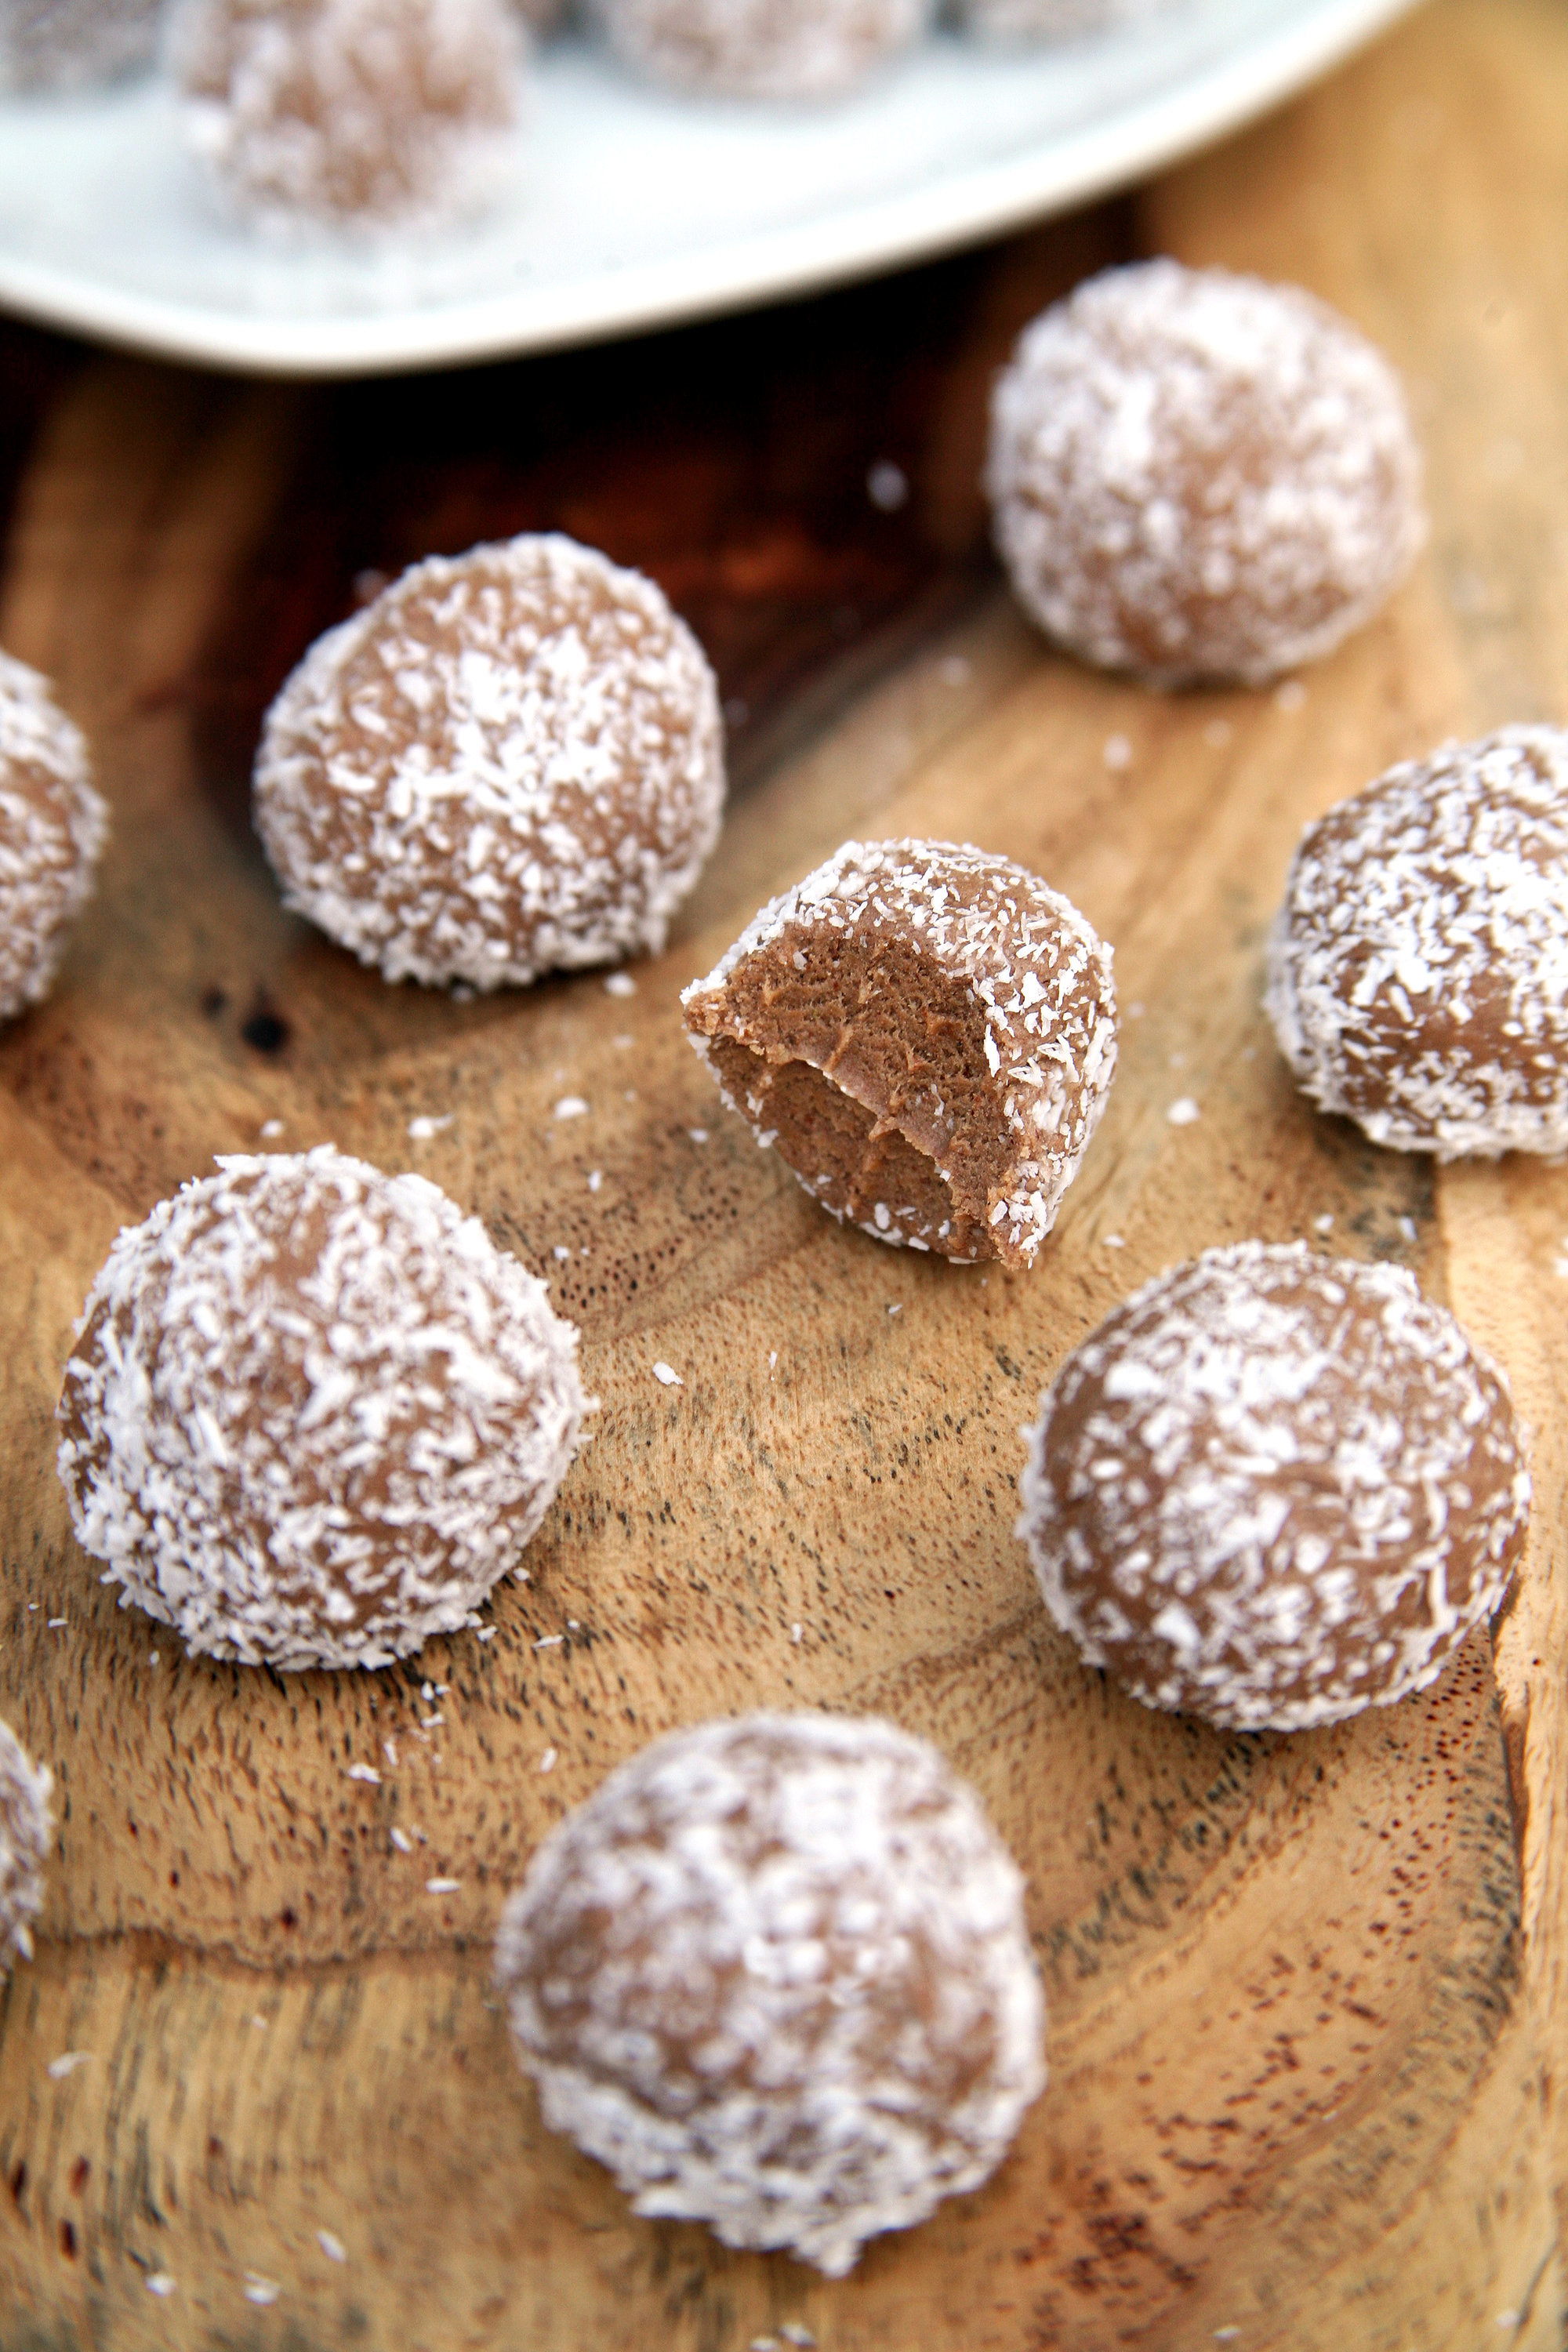 50-Calorie Coconut-Covered Chocolate Protein Balls